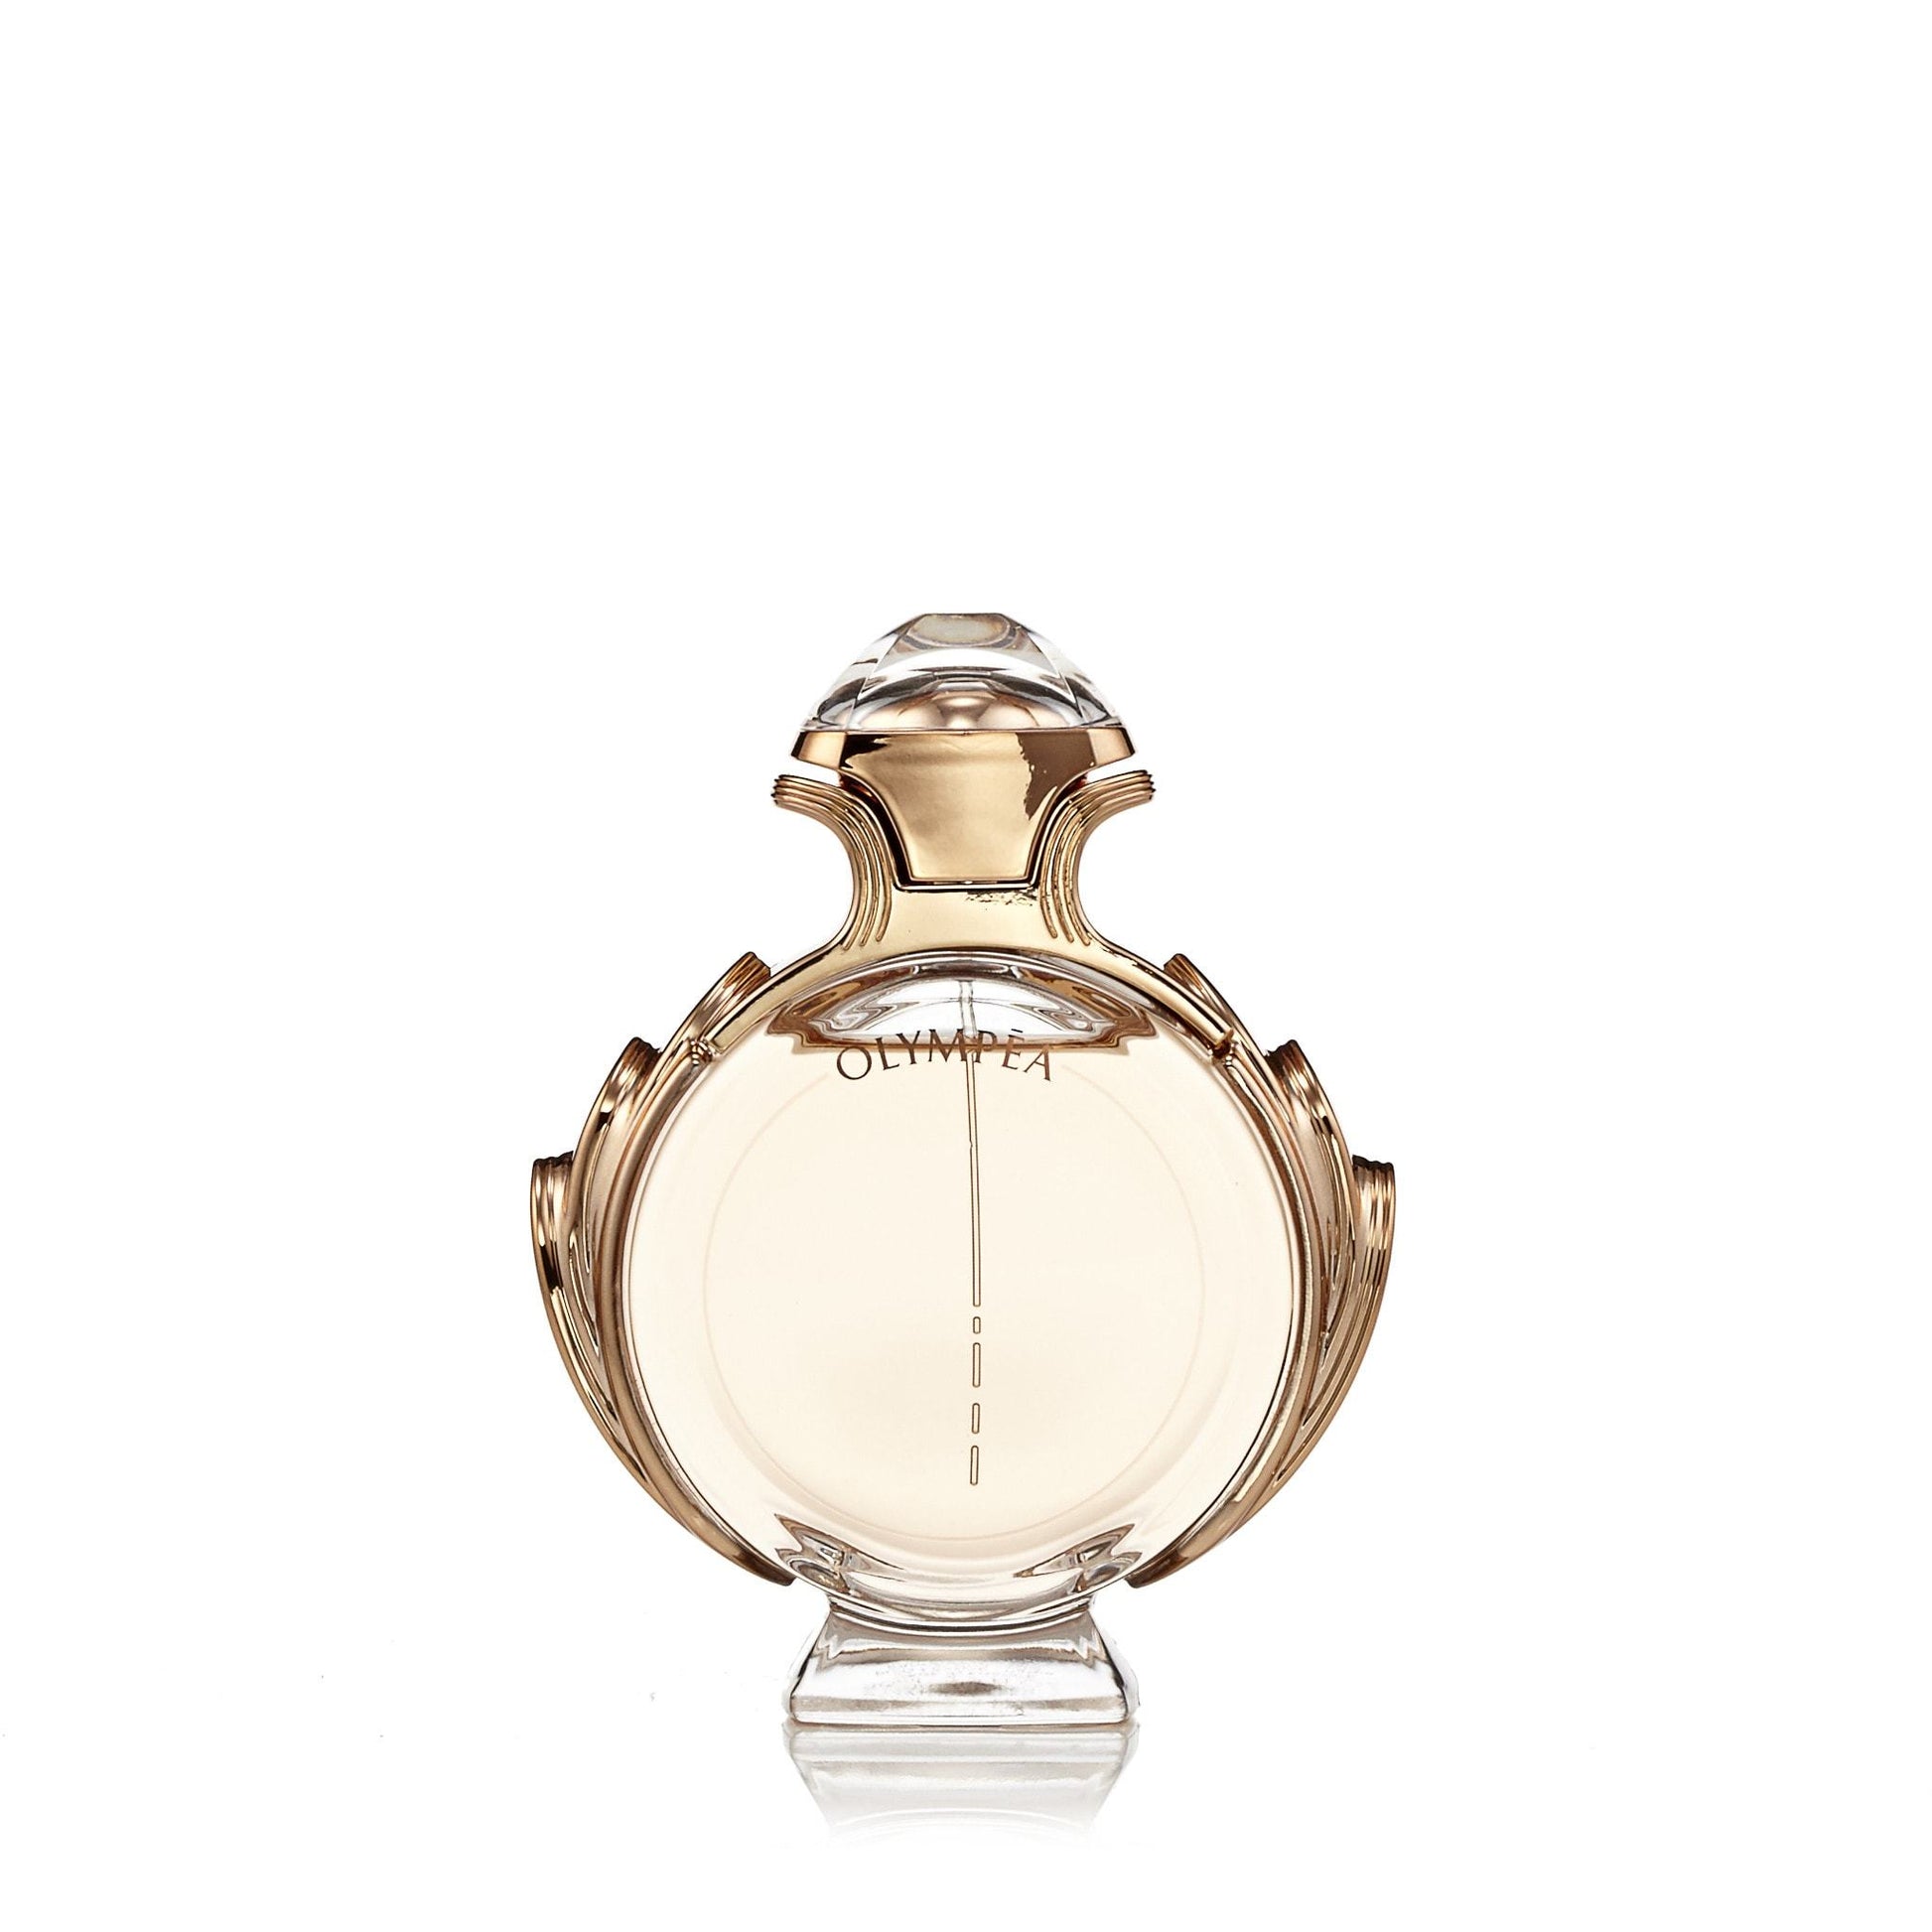 Olympea Eau de Parfum Spray for Women by Paco Rabanne, Product image 1